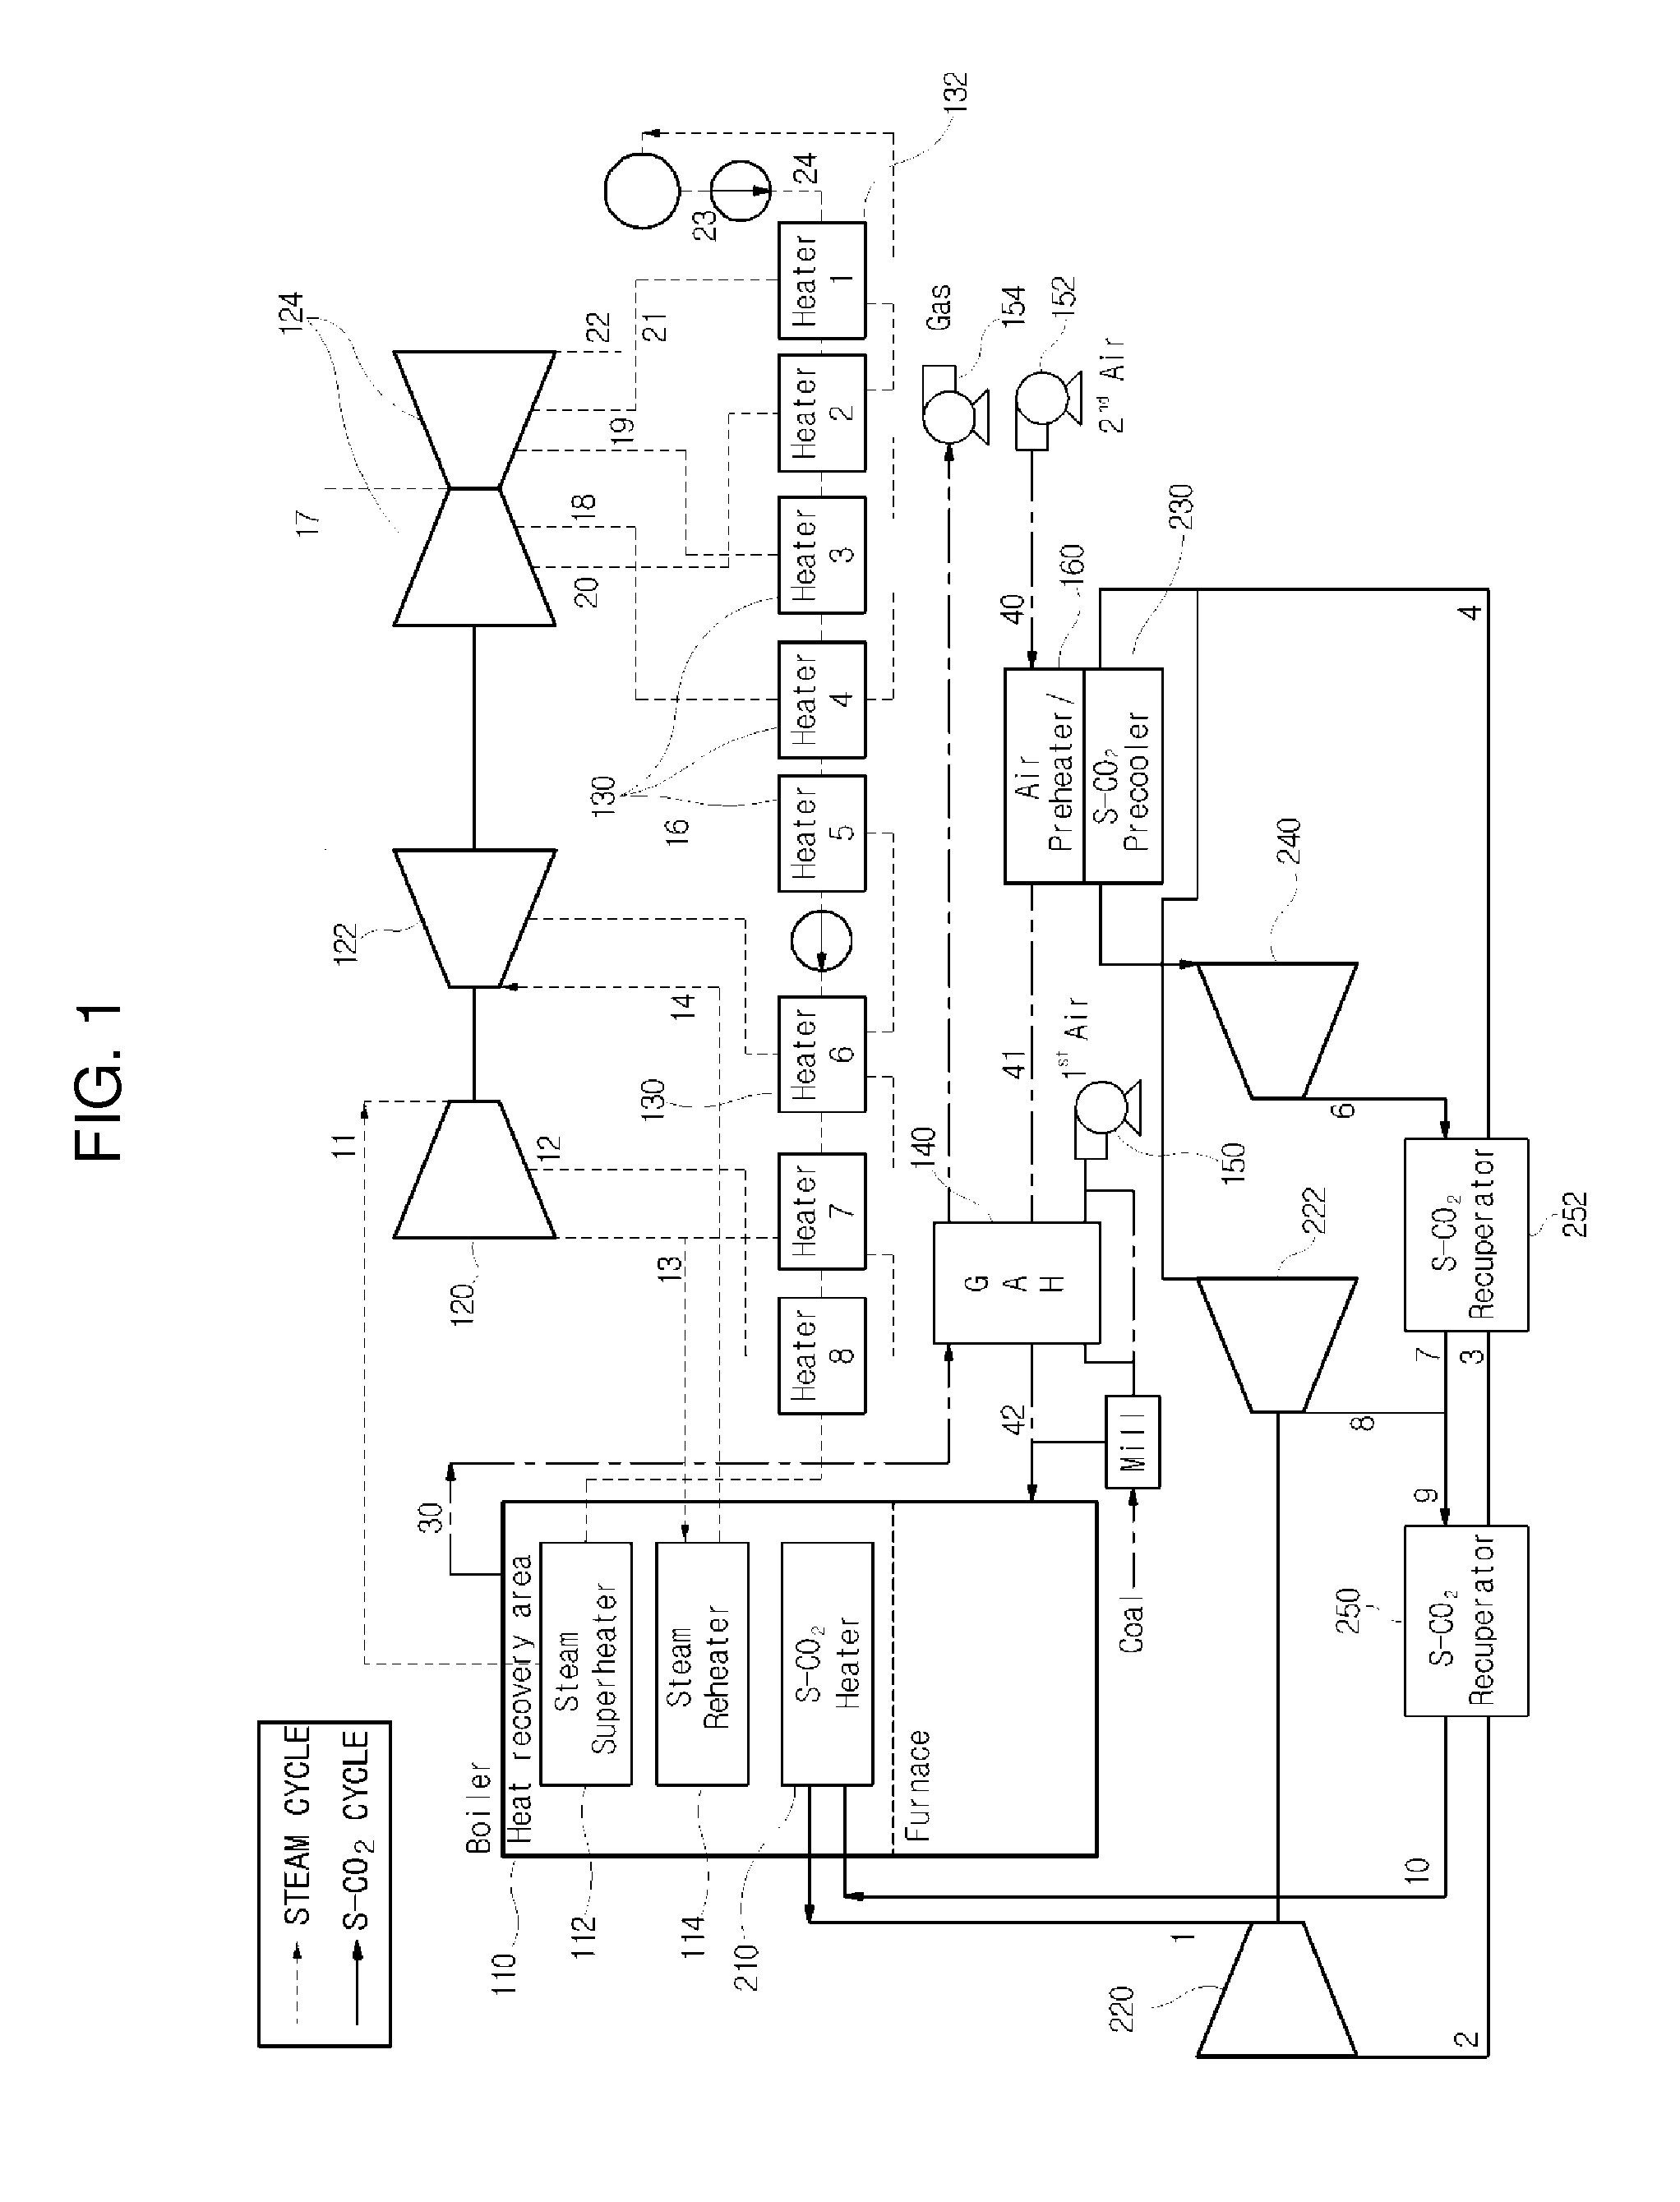 Hybrid power generation system and method using supercritical co2 cycle